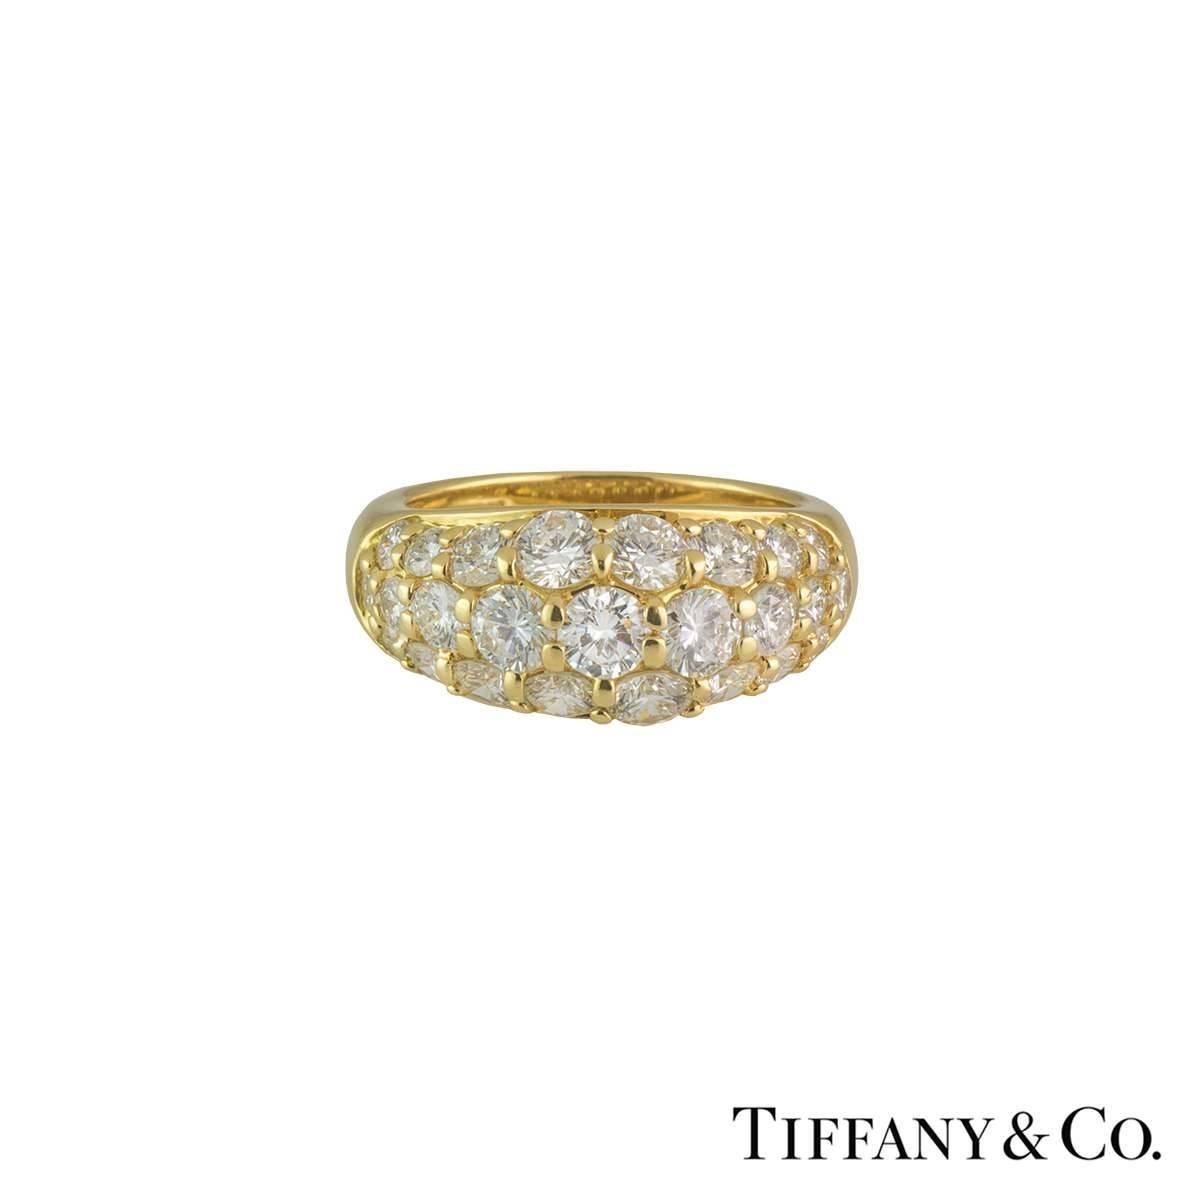 A stunning 18k yellow gold diamond set bombe style half eternity ring by Tiffany & Co. The ring is set to the centre with three rows of graduating round brilliant cut diamonds, each individually claw set, totalling approximately 2.20ct,